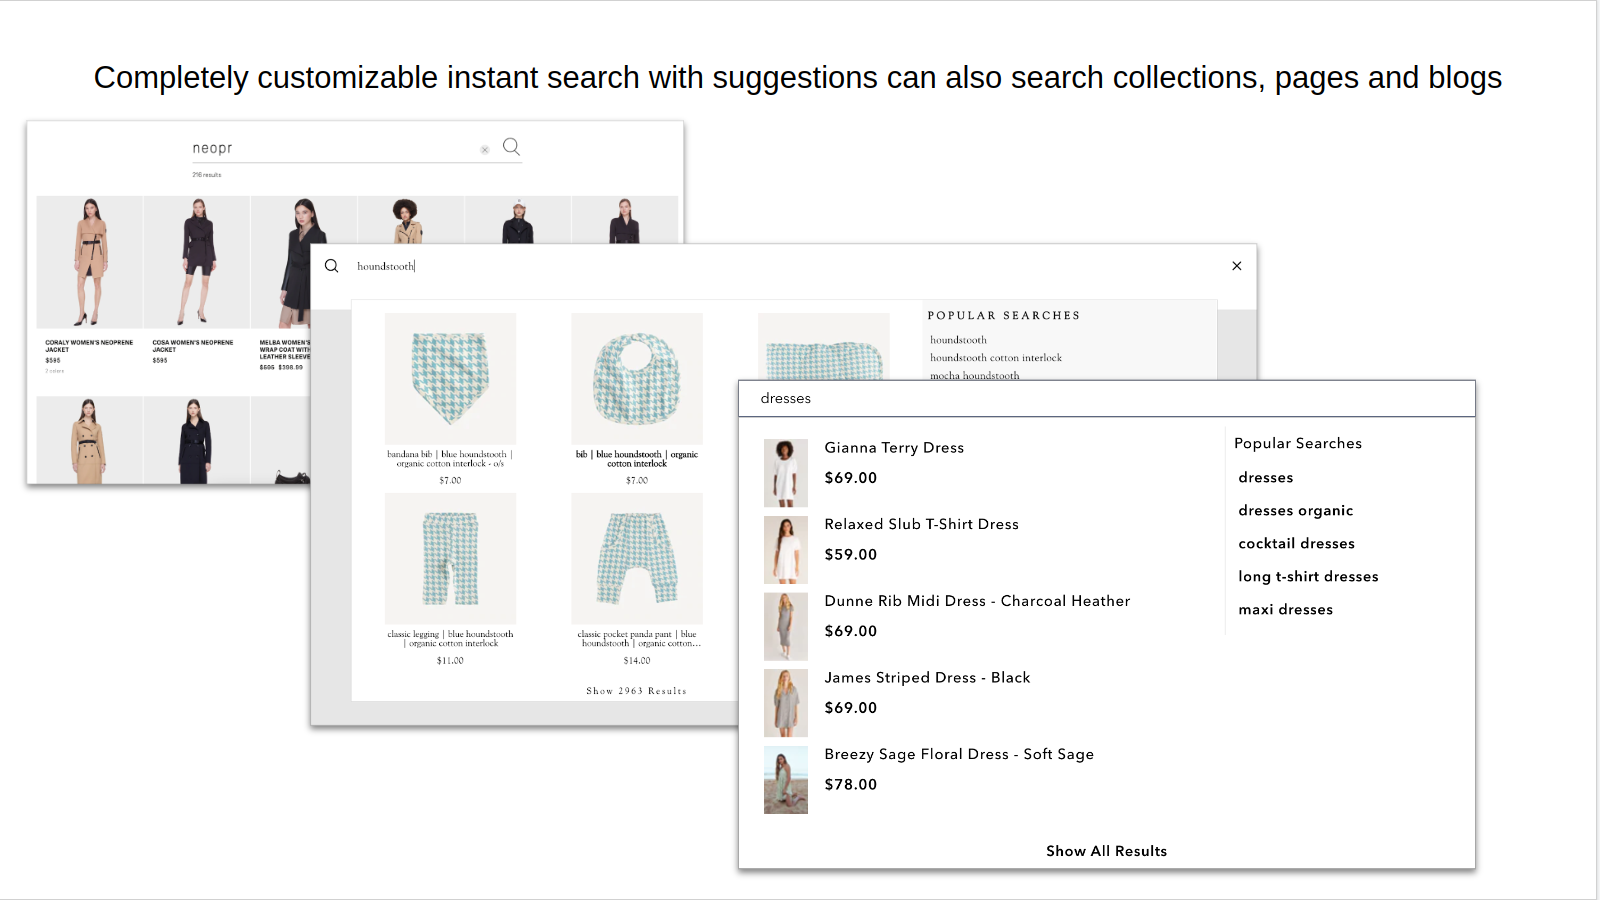 Instant Search and Popular Searches